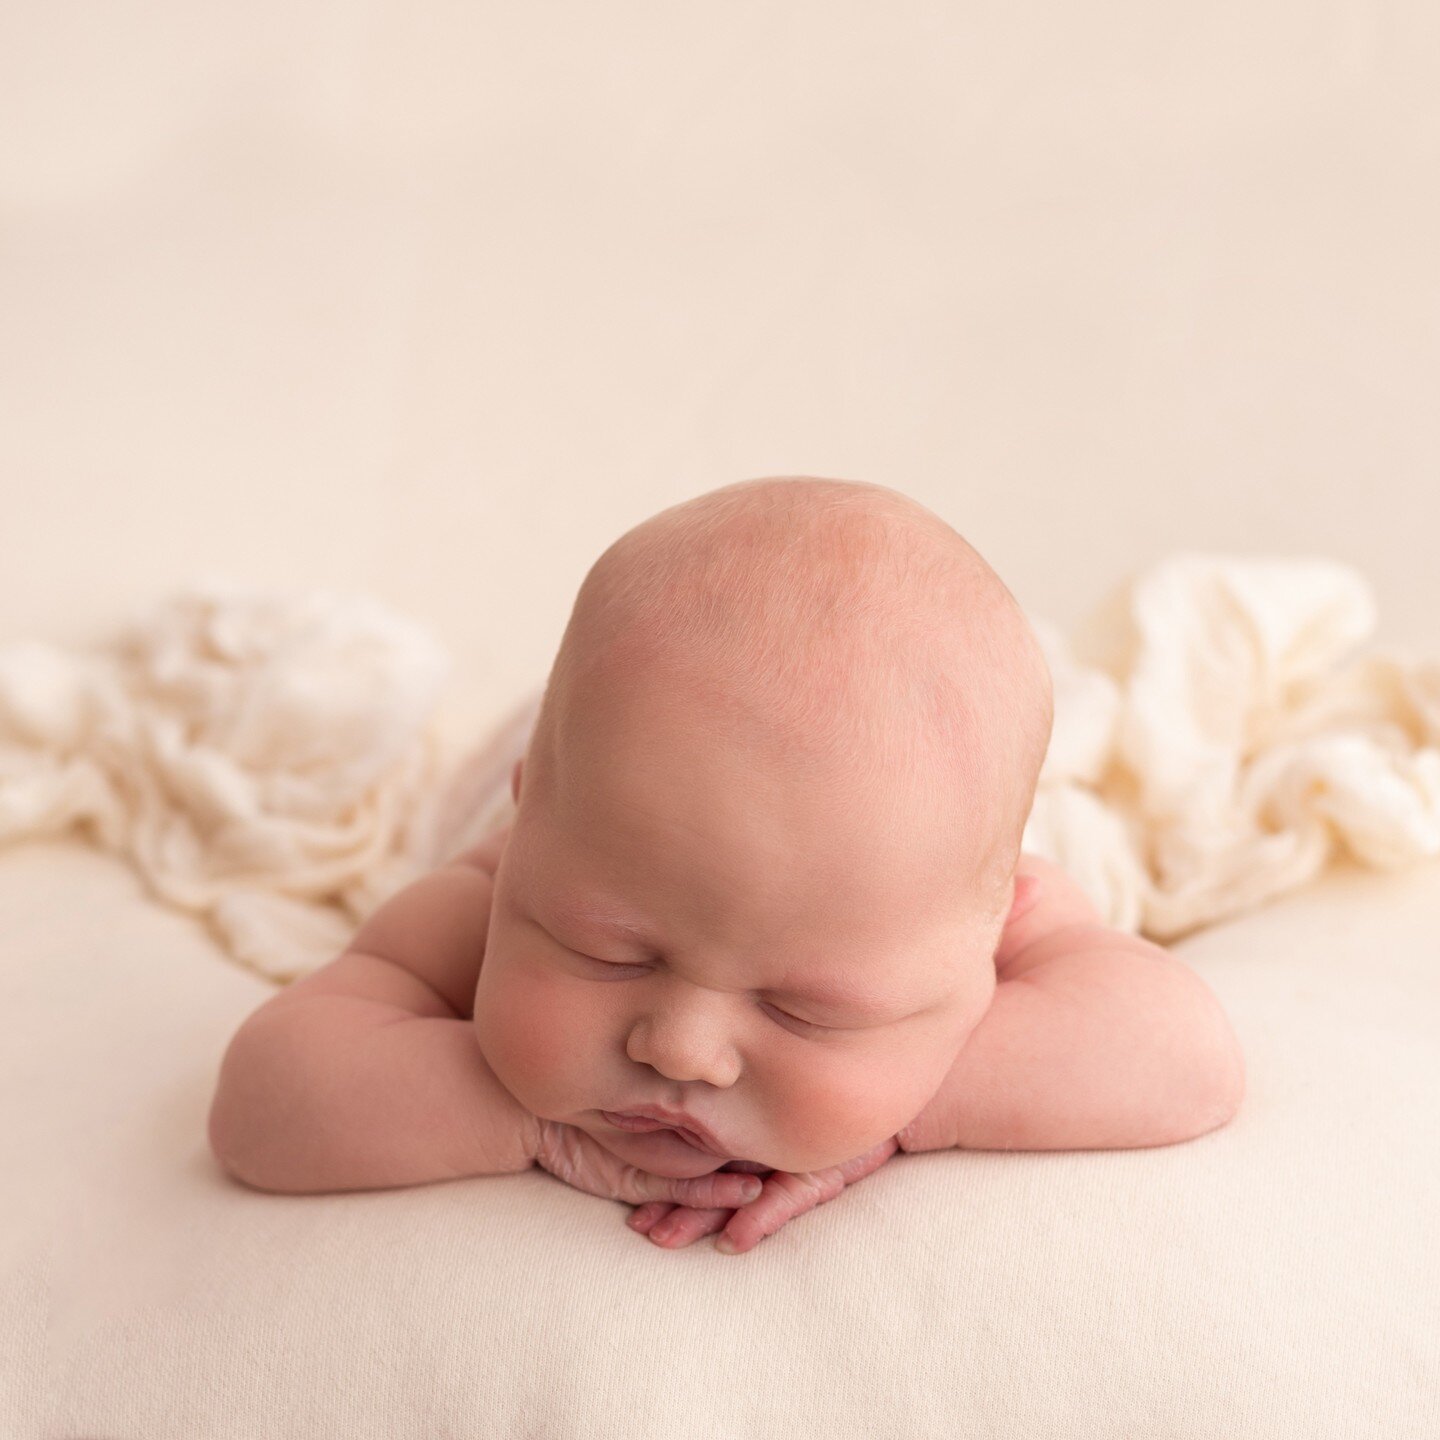 Sleepy babe ❤️

This pose will always have a special place in my heart, it's the very first pose I saw online and the one that made me want to learn the craft of newborn photography. It is the very first pose I ever taught myself and it's one that ha